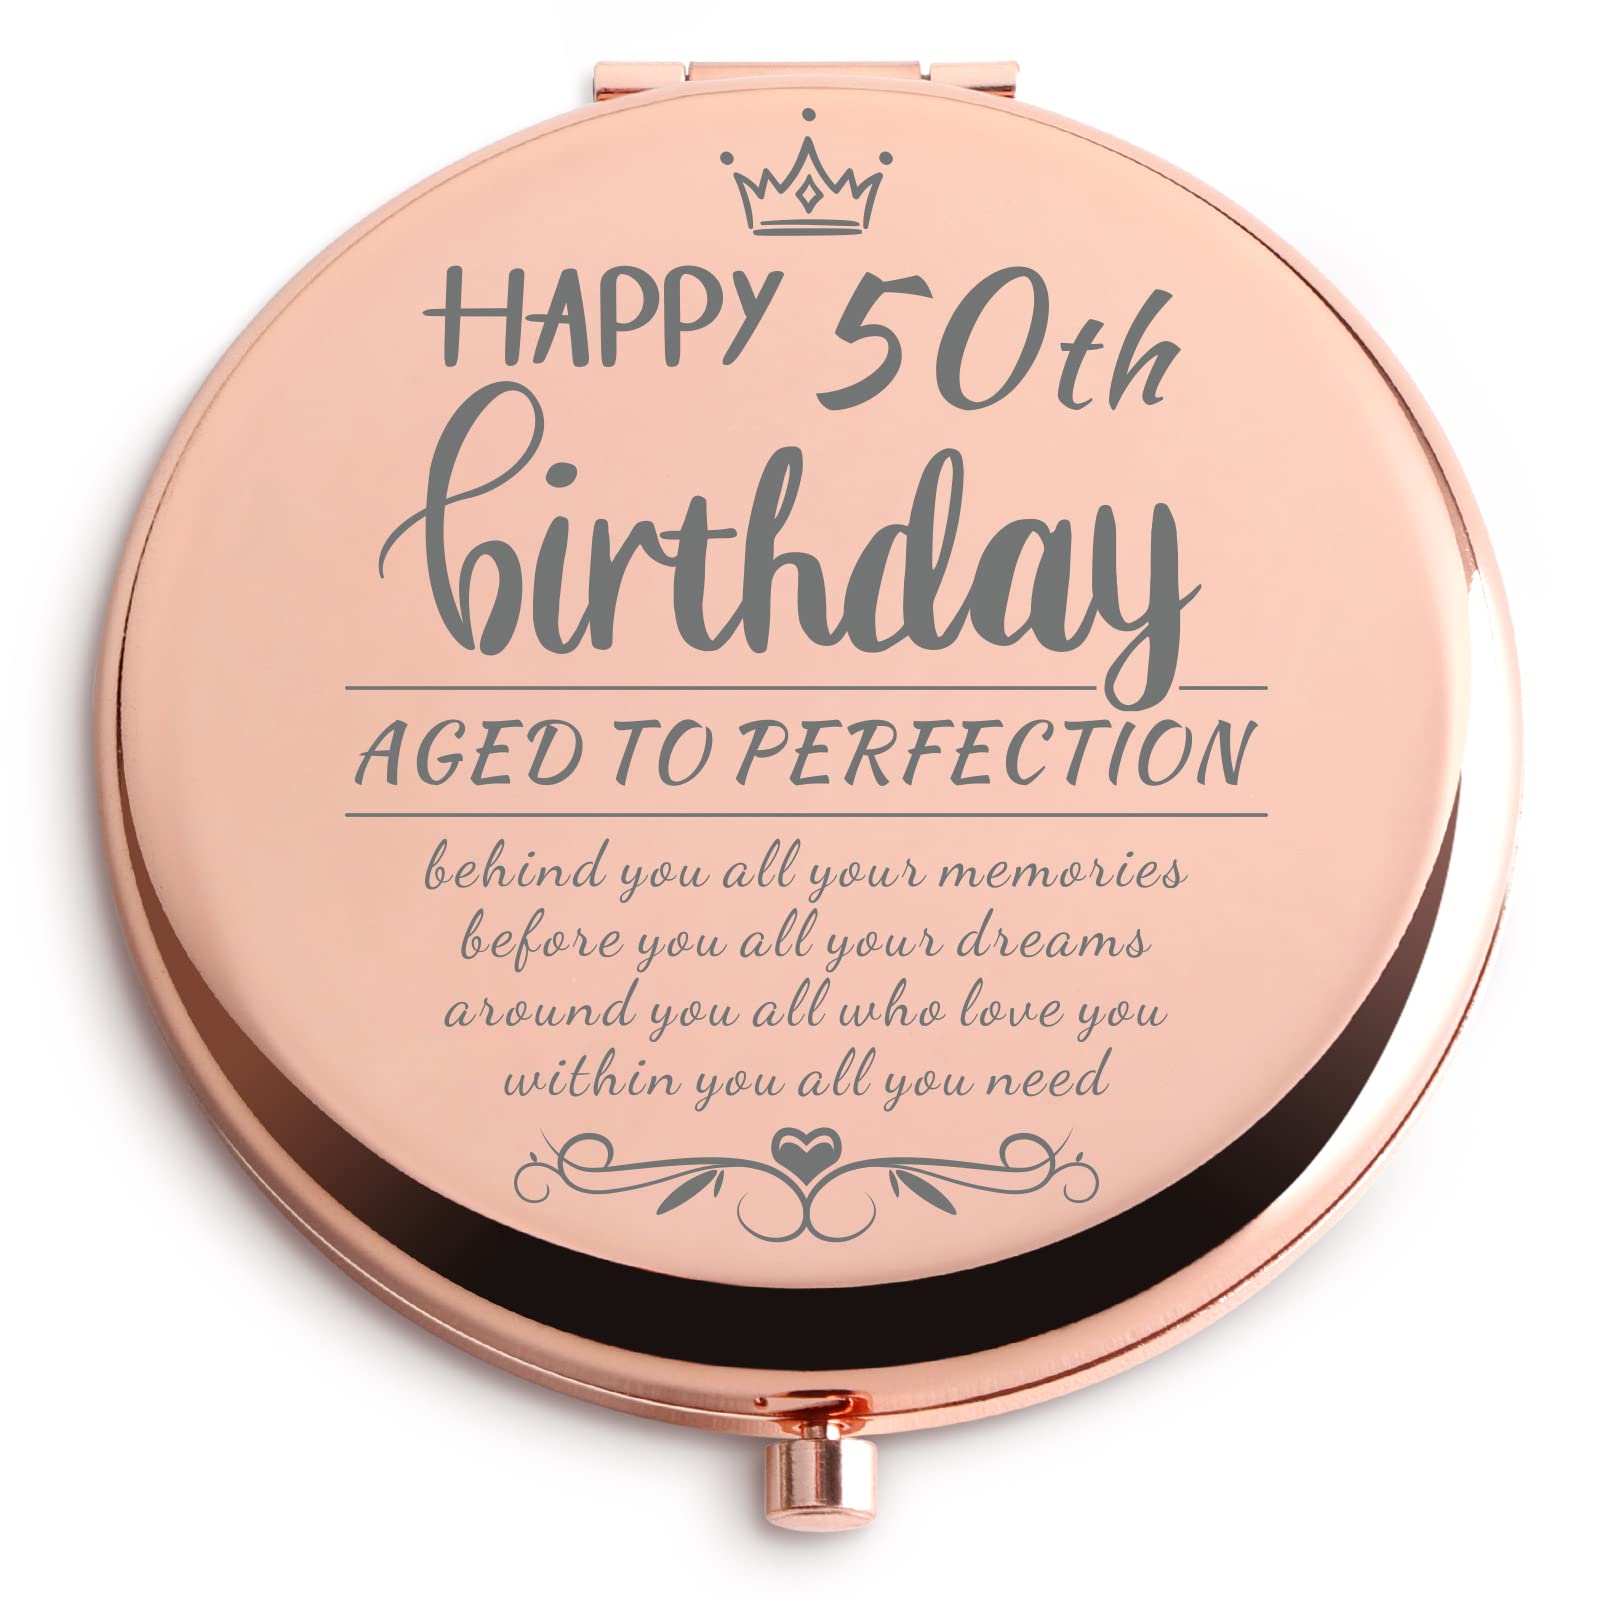 Unusual Gifts for Her 30th Birthday | Auric Jewellery